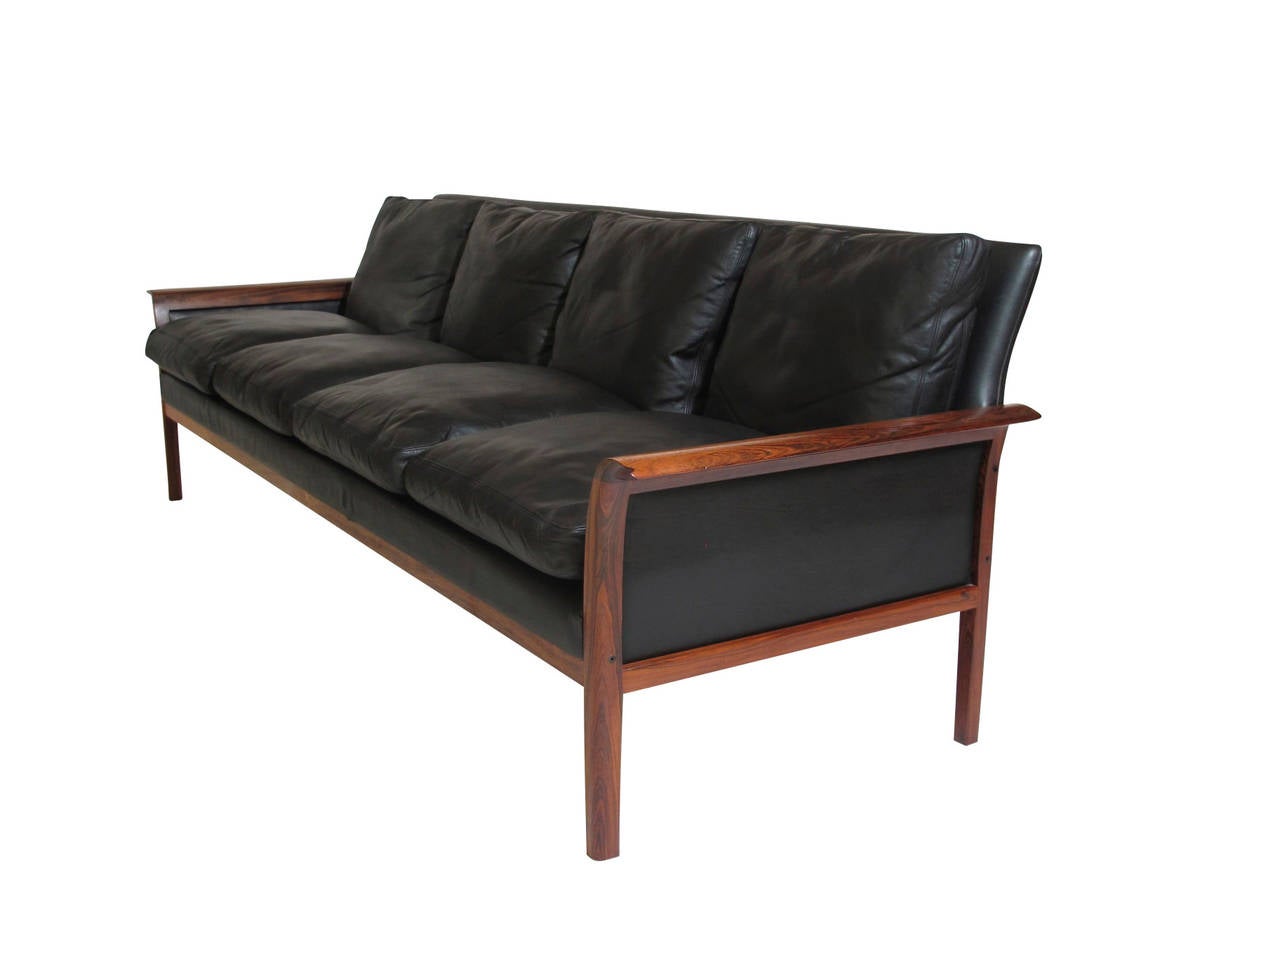 Mid-century Brazilian Rosewood three seat sofa designed by Hans Olsen. Solid Brazilian Rosewood frame with unique flared arms. Original black leather with goose down filled cushions.